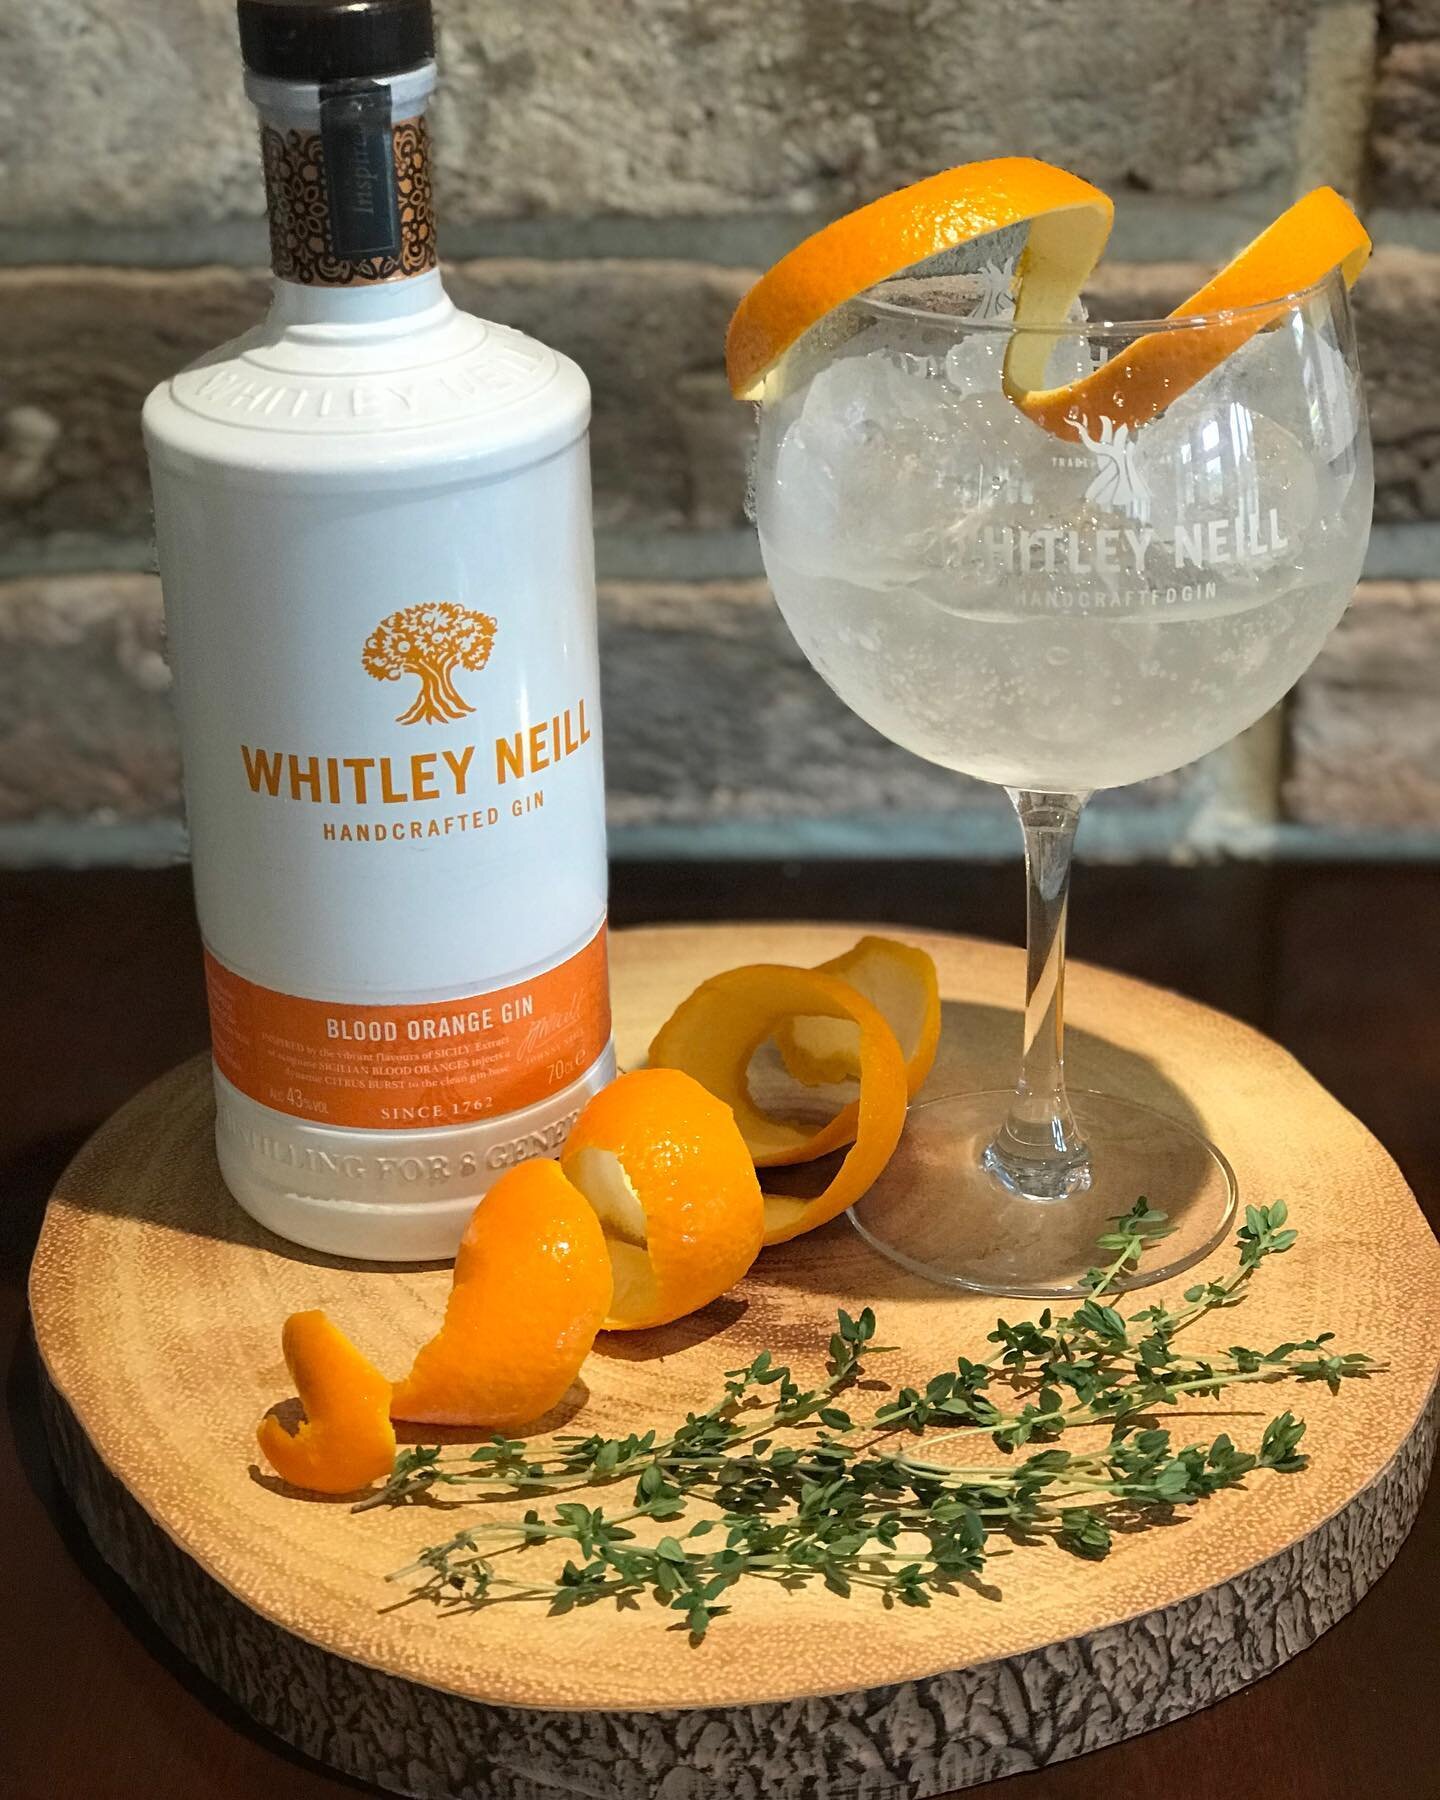 Our Gin of the Week is ..

Whitley Neill&rsquo;s Blood Orange &hellip; bright and zesty with a sweet burst of Sicilian blood oranges offering a smooth crisp taste of the Mediterranean Sea.

#brenthousecarvery #restaurant #gin #whitleyneill #ginoclock